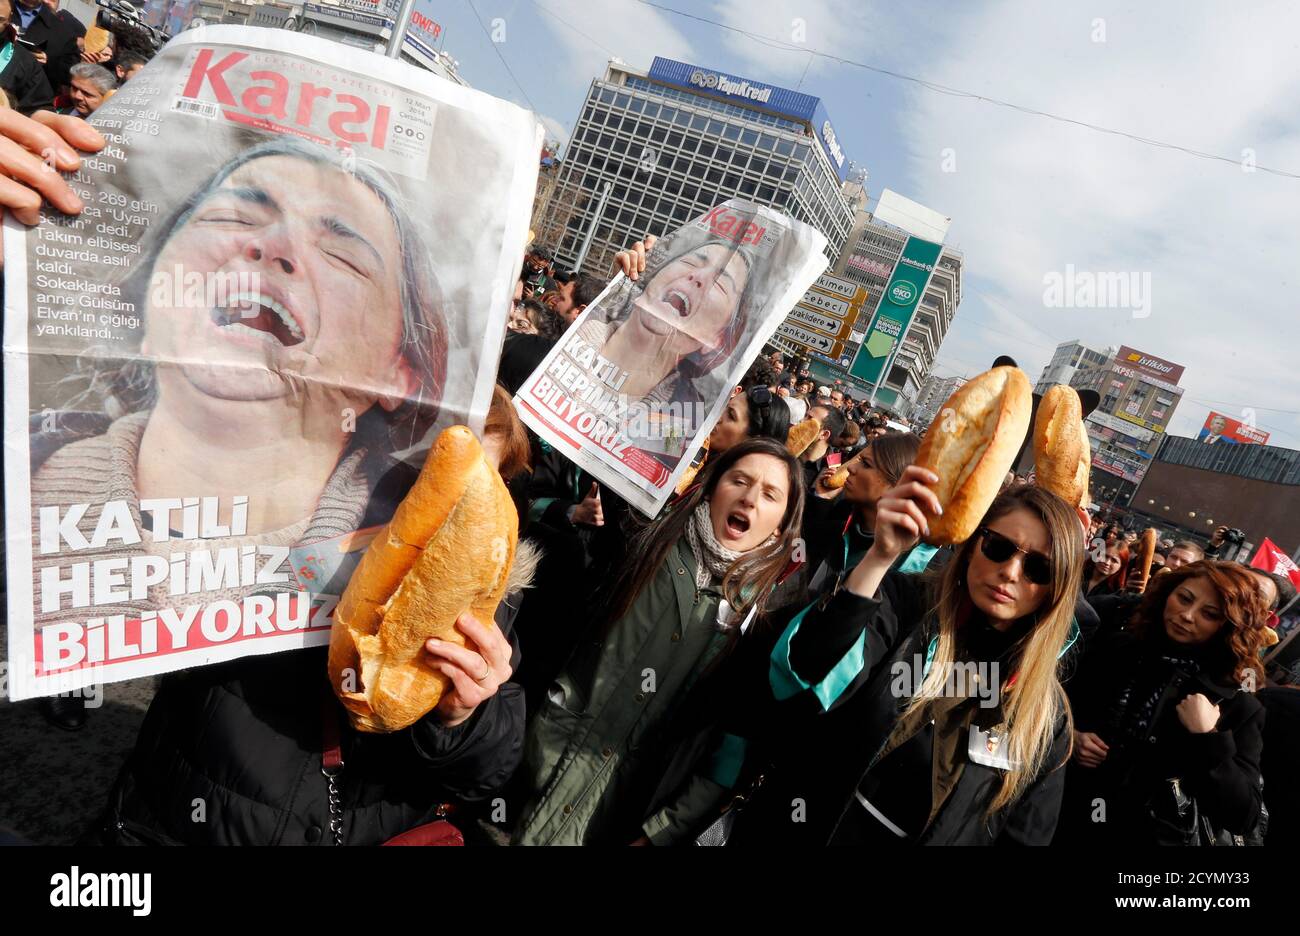 Anti-government protesters carry posters of Berkin Elvan's mother and bread during a demonstration marking the funeral of Elvan in Ankara March 12, 2014. Several thousand mourners gathered in central Istanbul and Ankara on Wednesday for the funeral of Elvan, a 15-year-old boy wounded during anti-government demonstrations last summer whose death on Tuesday triggered protests across Turkey. Elvan, then aged 14, got caught up in street battles in Istanbul between police and protesters on June 16, 2013 while going to buy bread for his family. REUTERS/Umit Bektas (TURKEY  - Tags: POLITICS CIVIL UNR Stock Photo